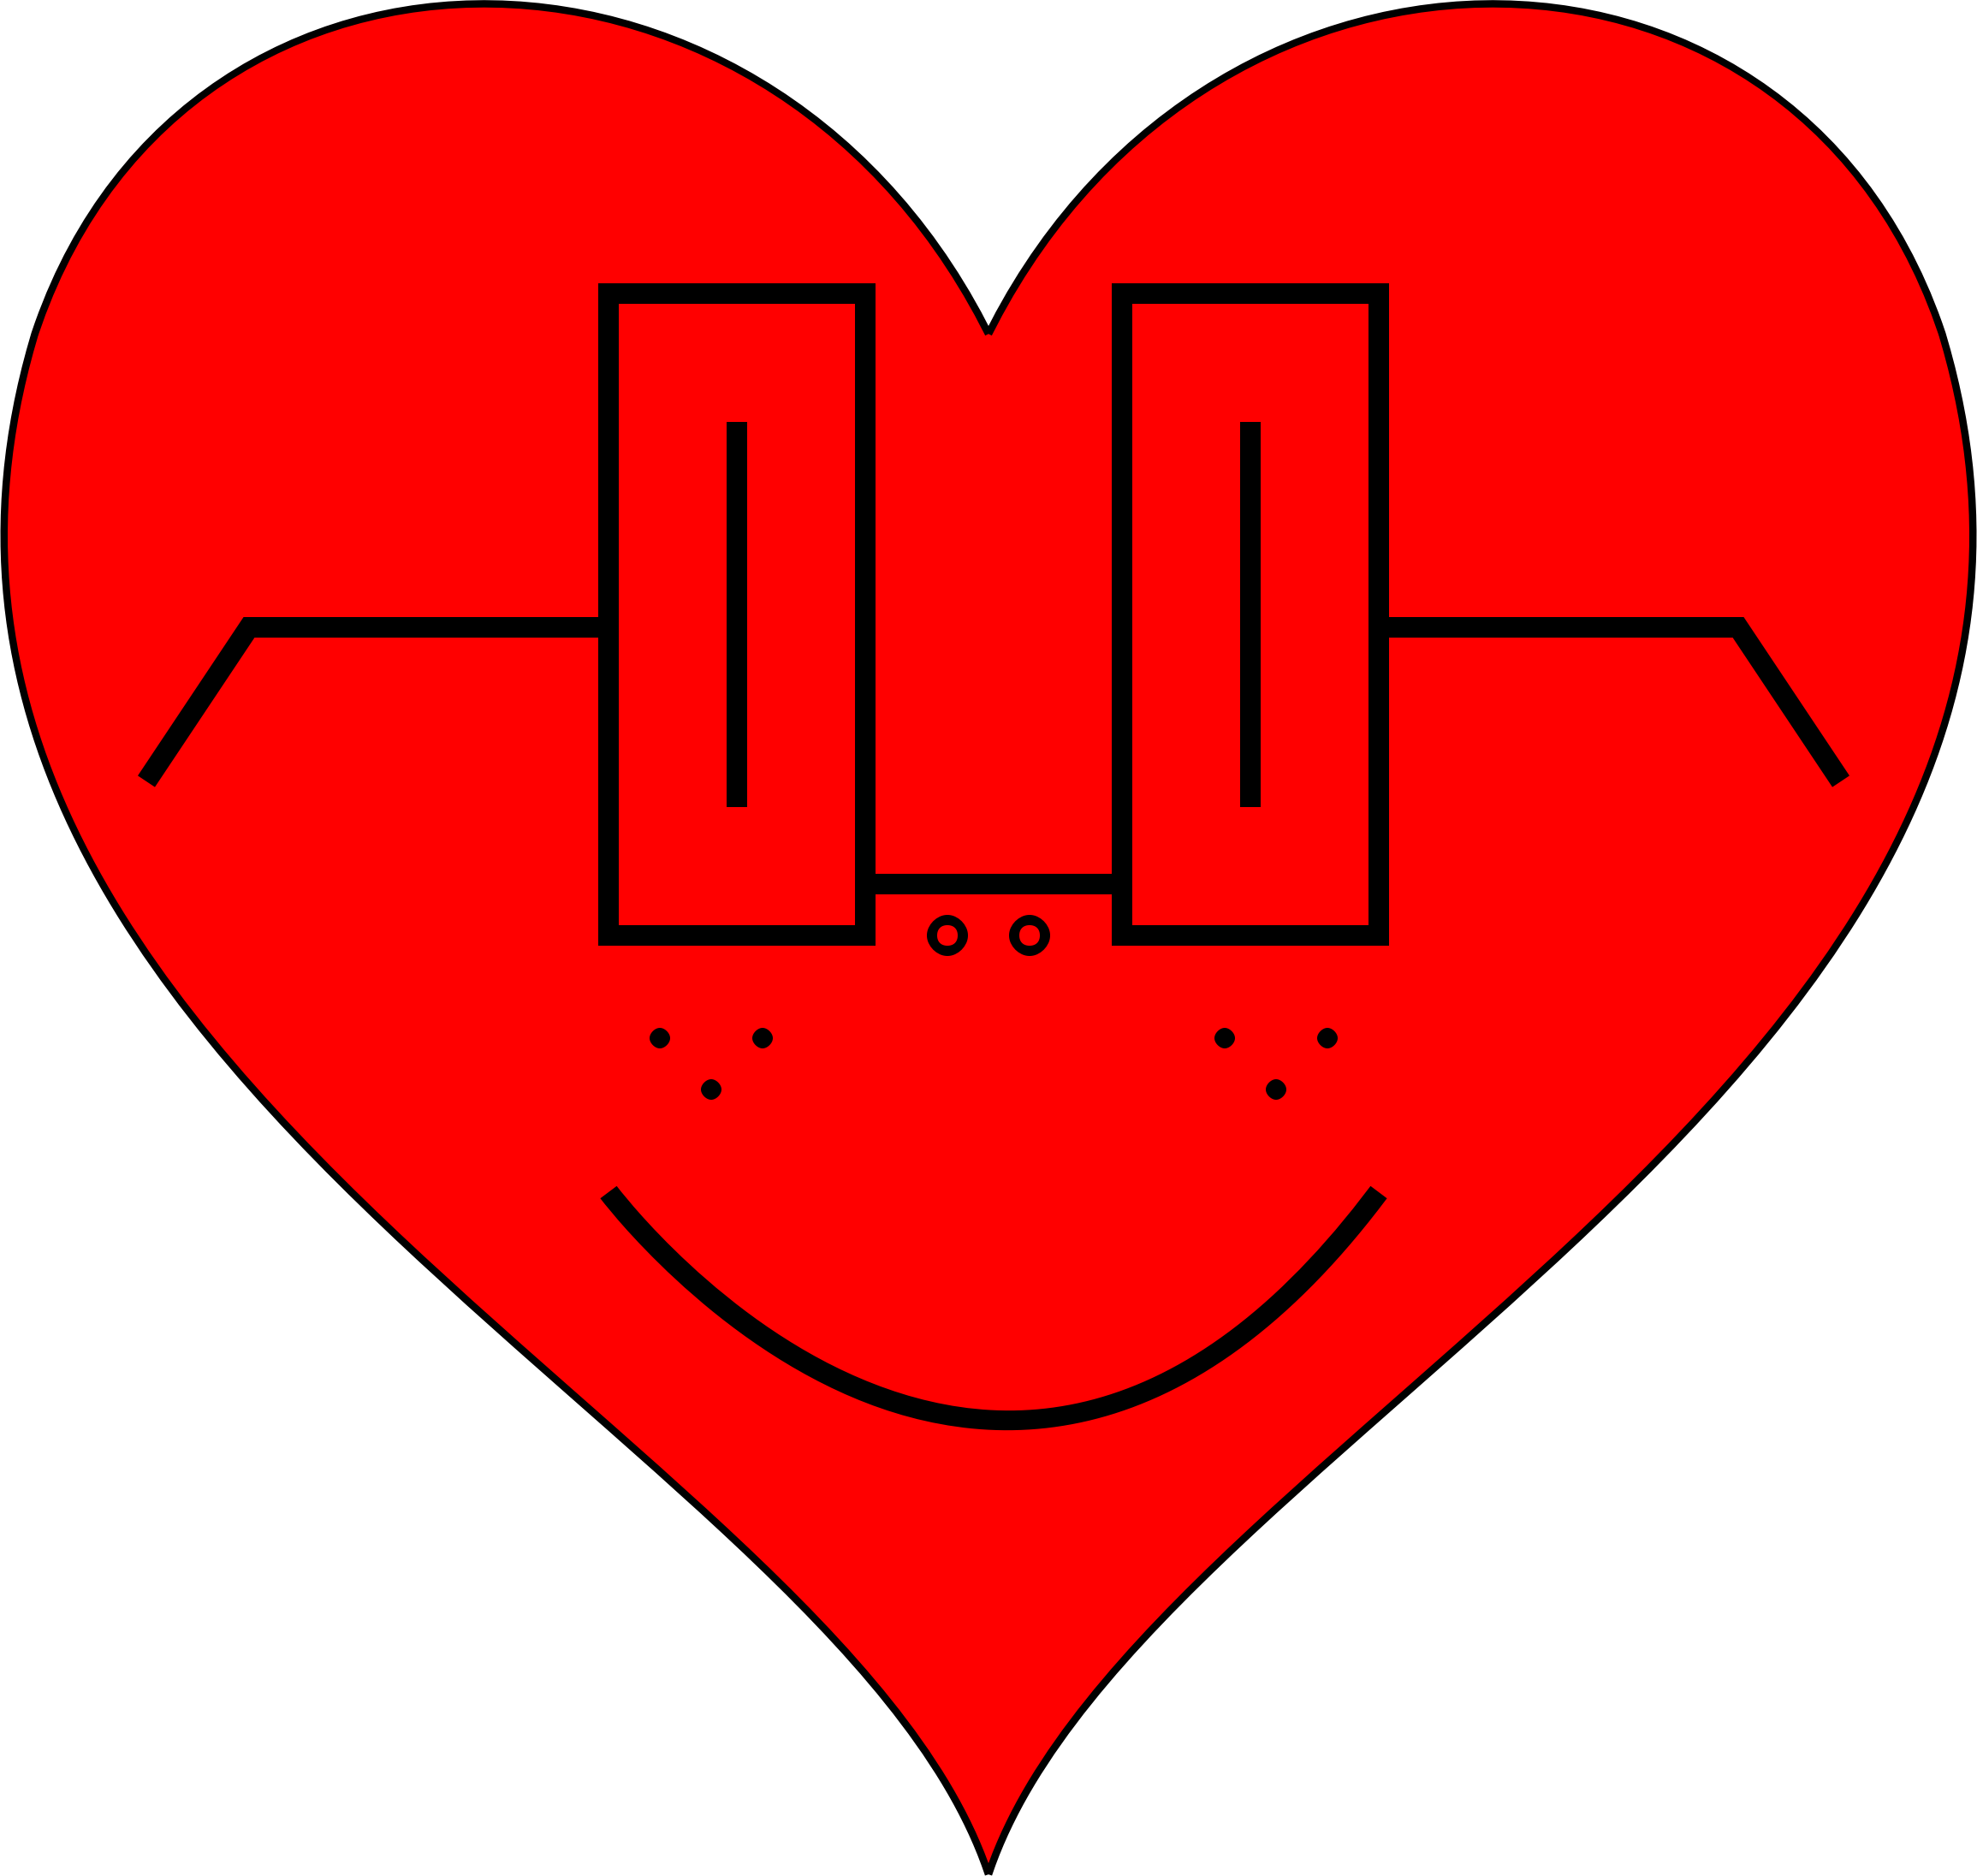 Smiley face big image. Faces clipart heart